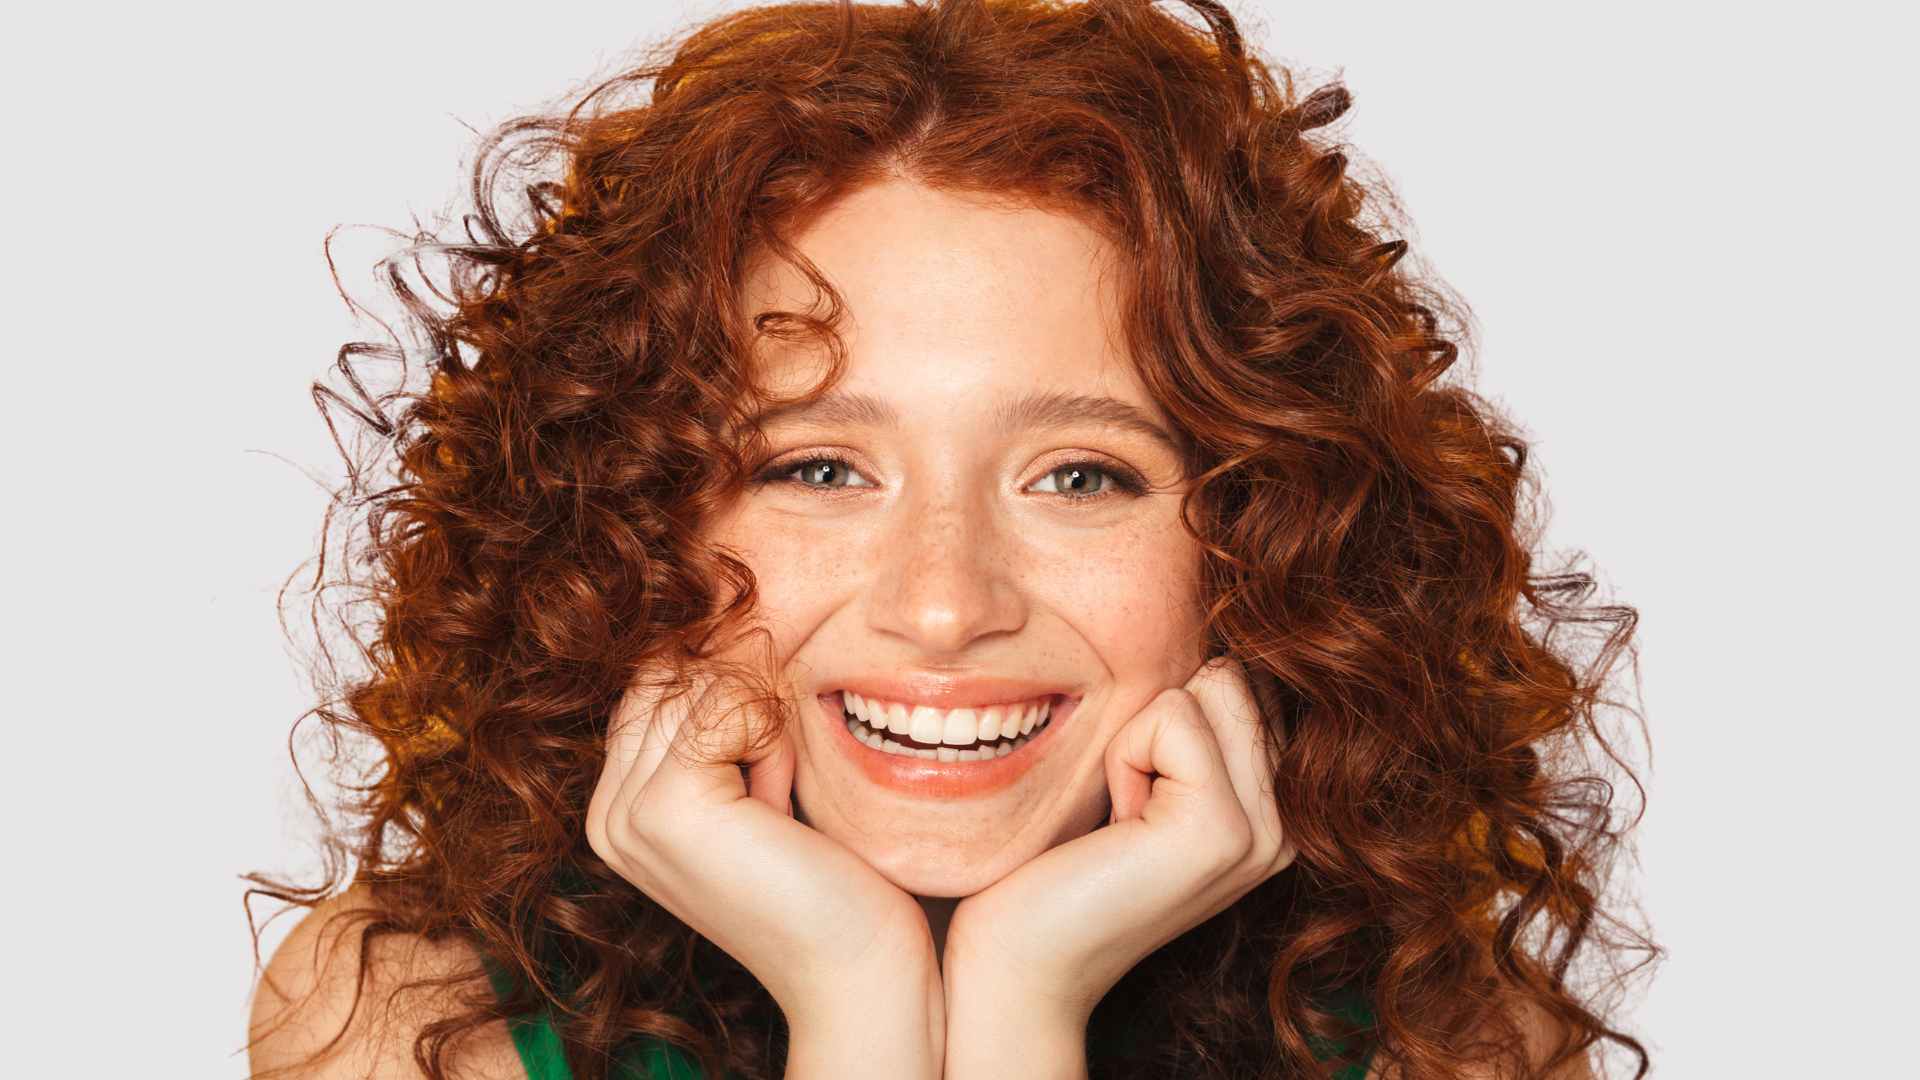 Smiling female with red curly hair